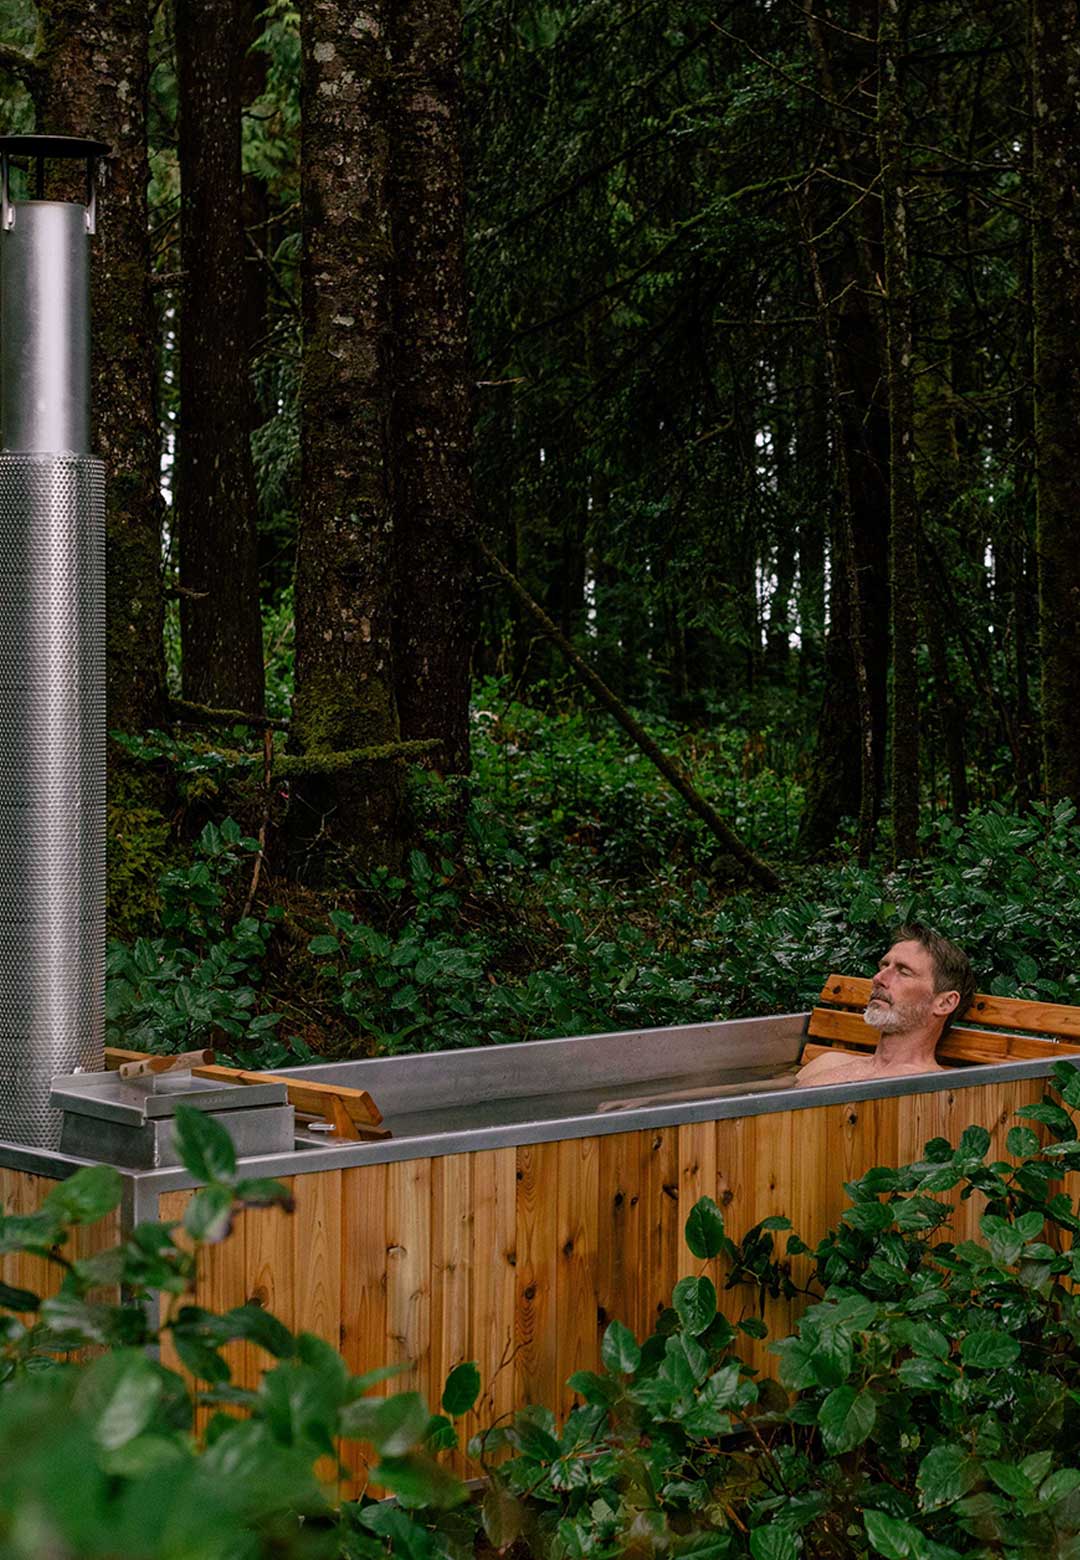 Goodland's Hot Tub exemplifies a slow-living glamping experience